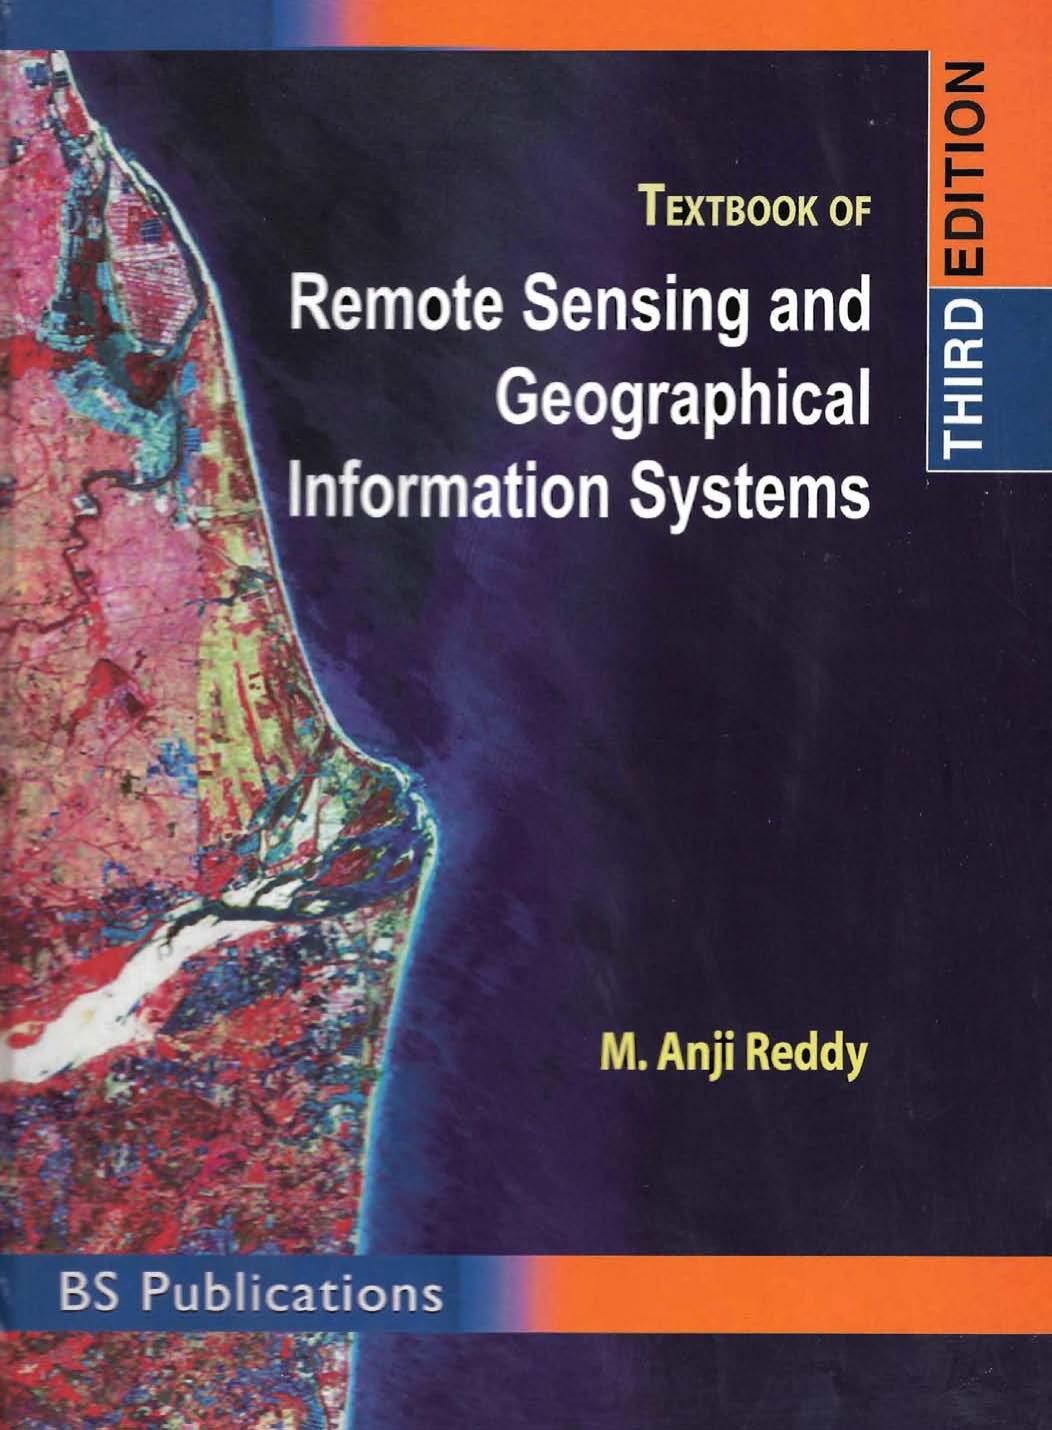 TEXTBOOK OF REMOTE SENSING AND GIS 3rd ed 2008